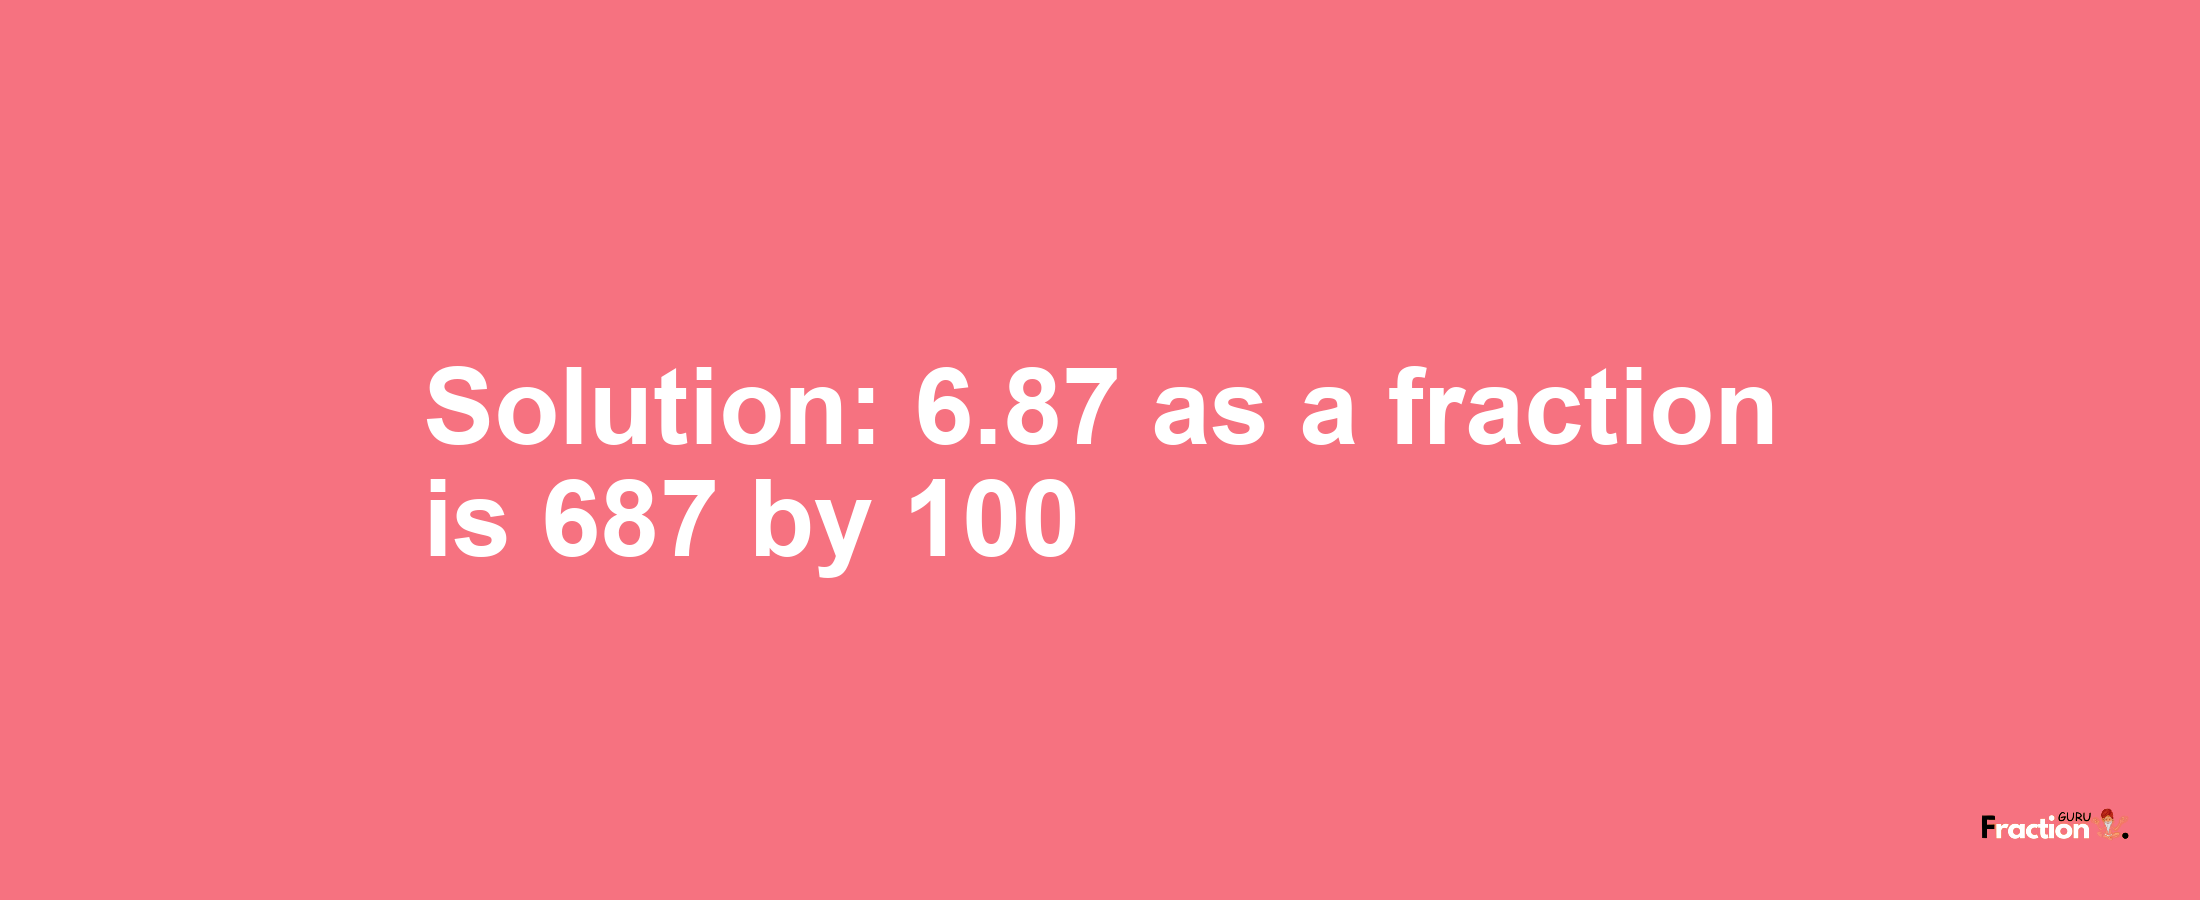 Solution:6.87 as a fraction is 687/100